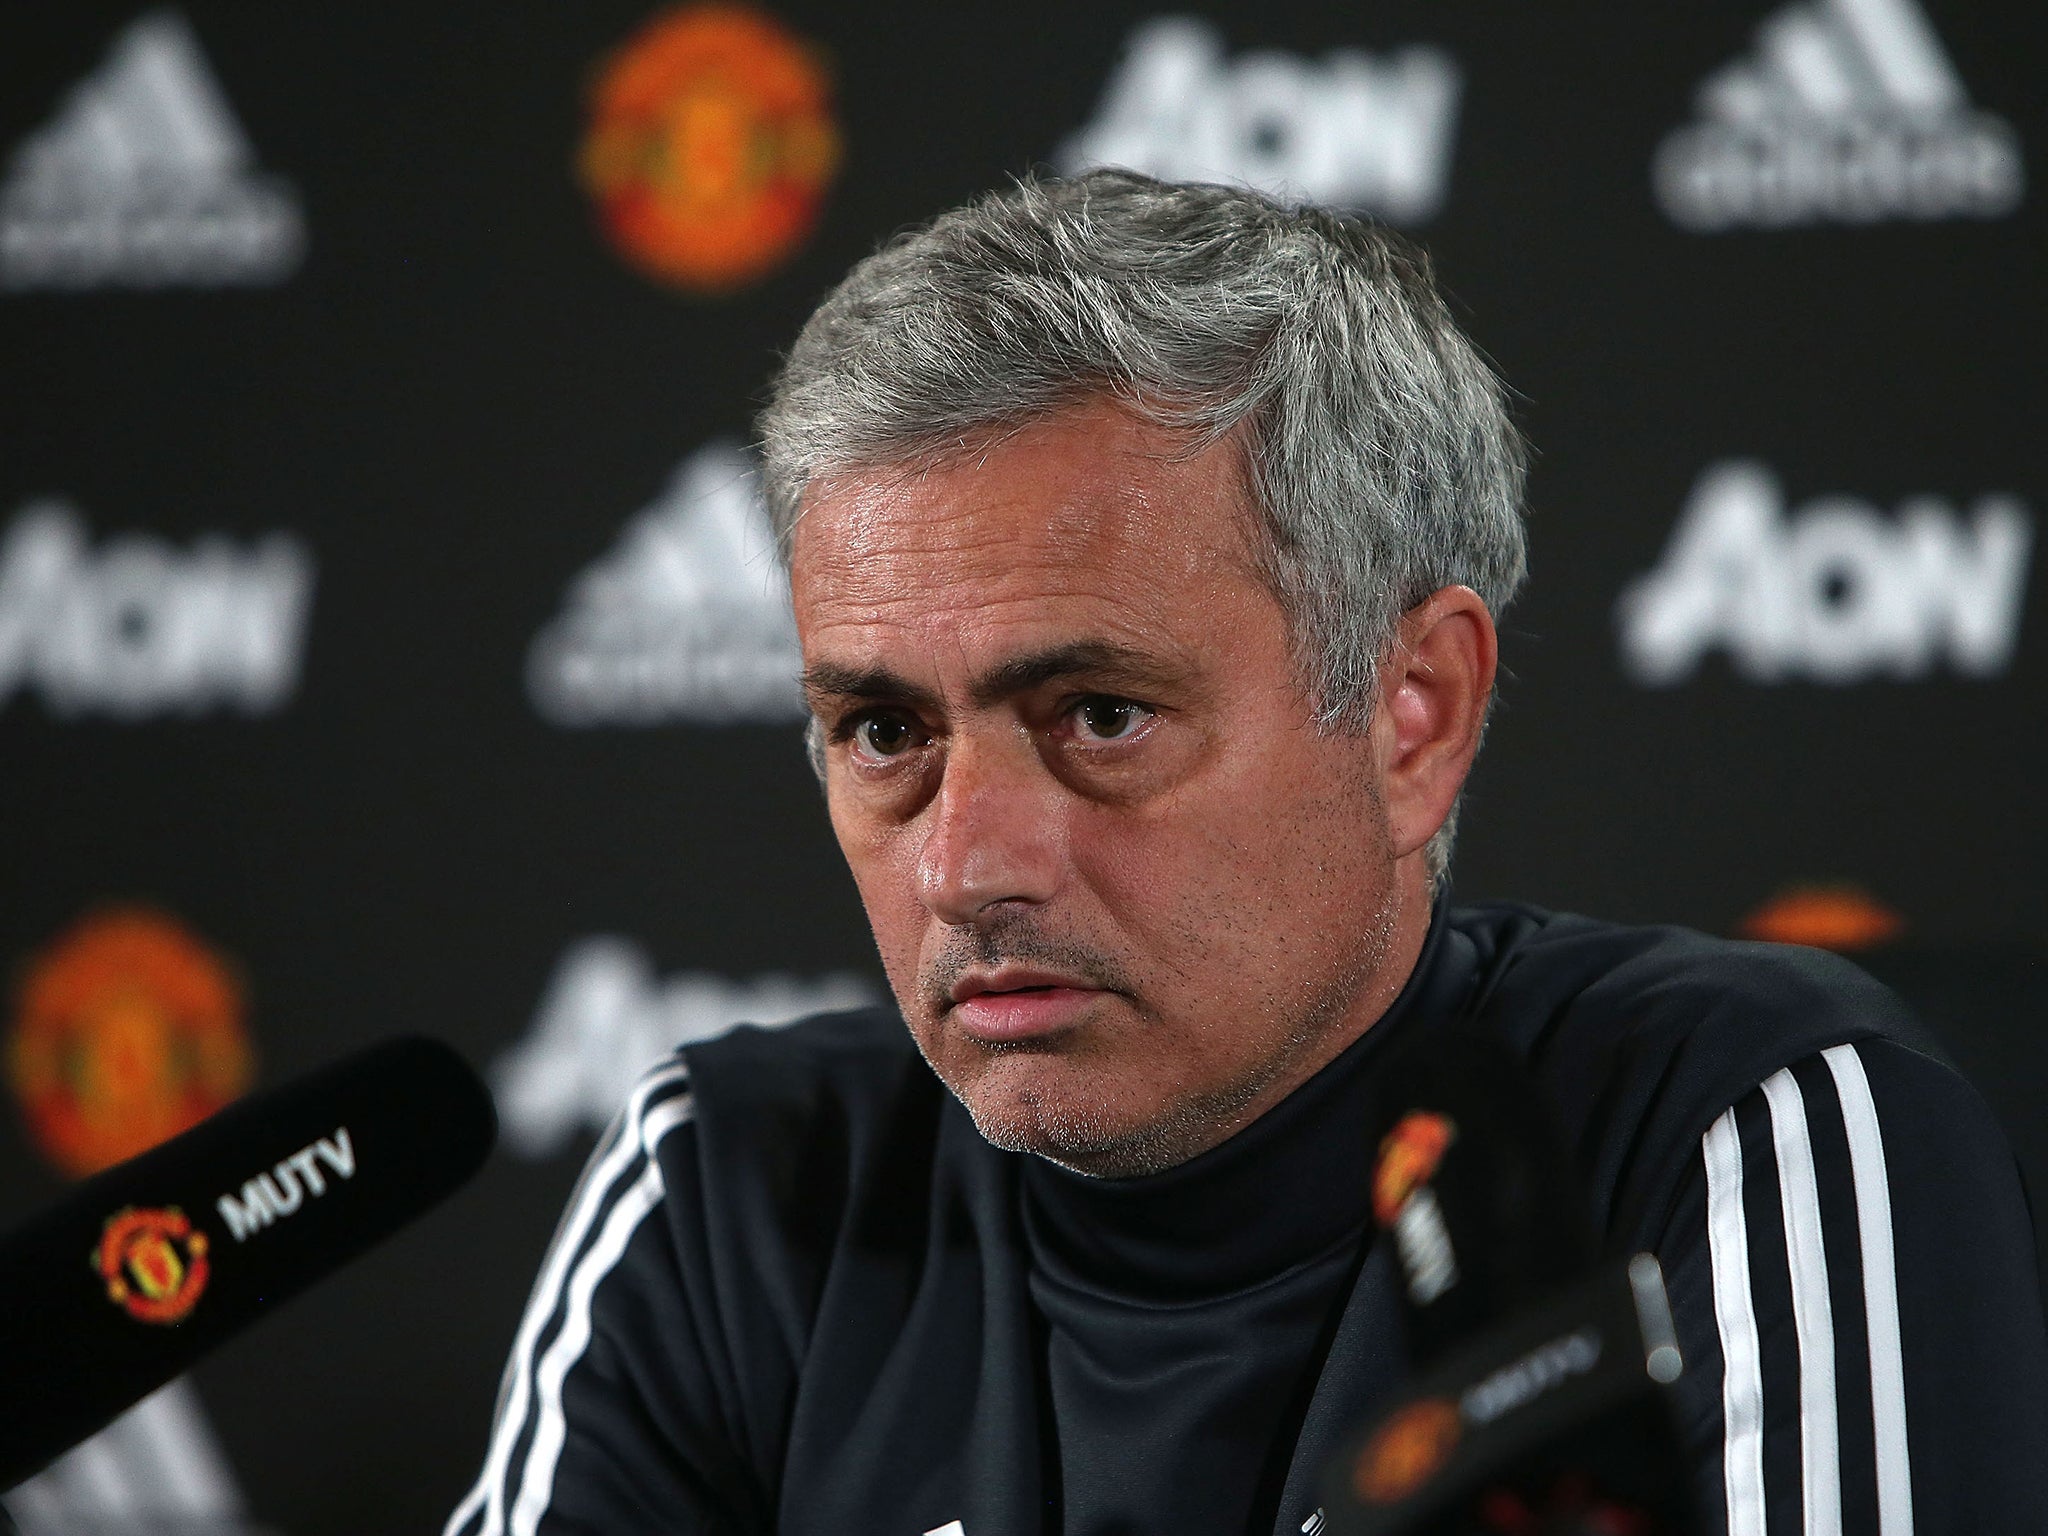 Jose Mourinho has been labelled a 'globetrotter' by France manager Didier Descamps